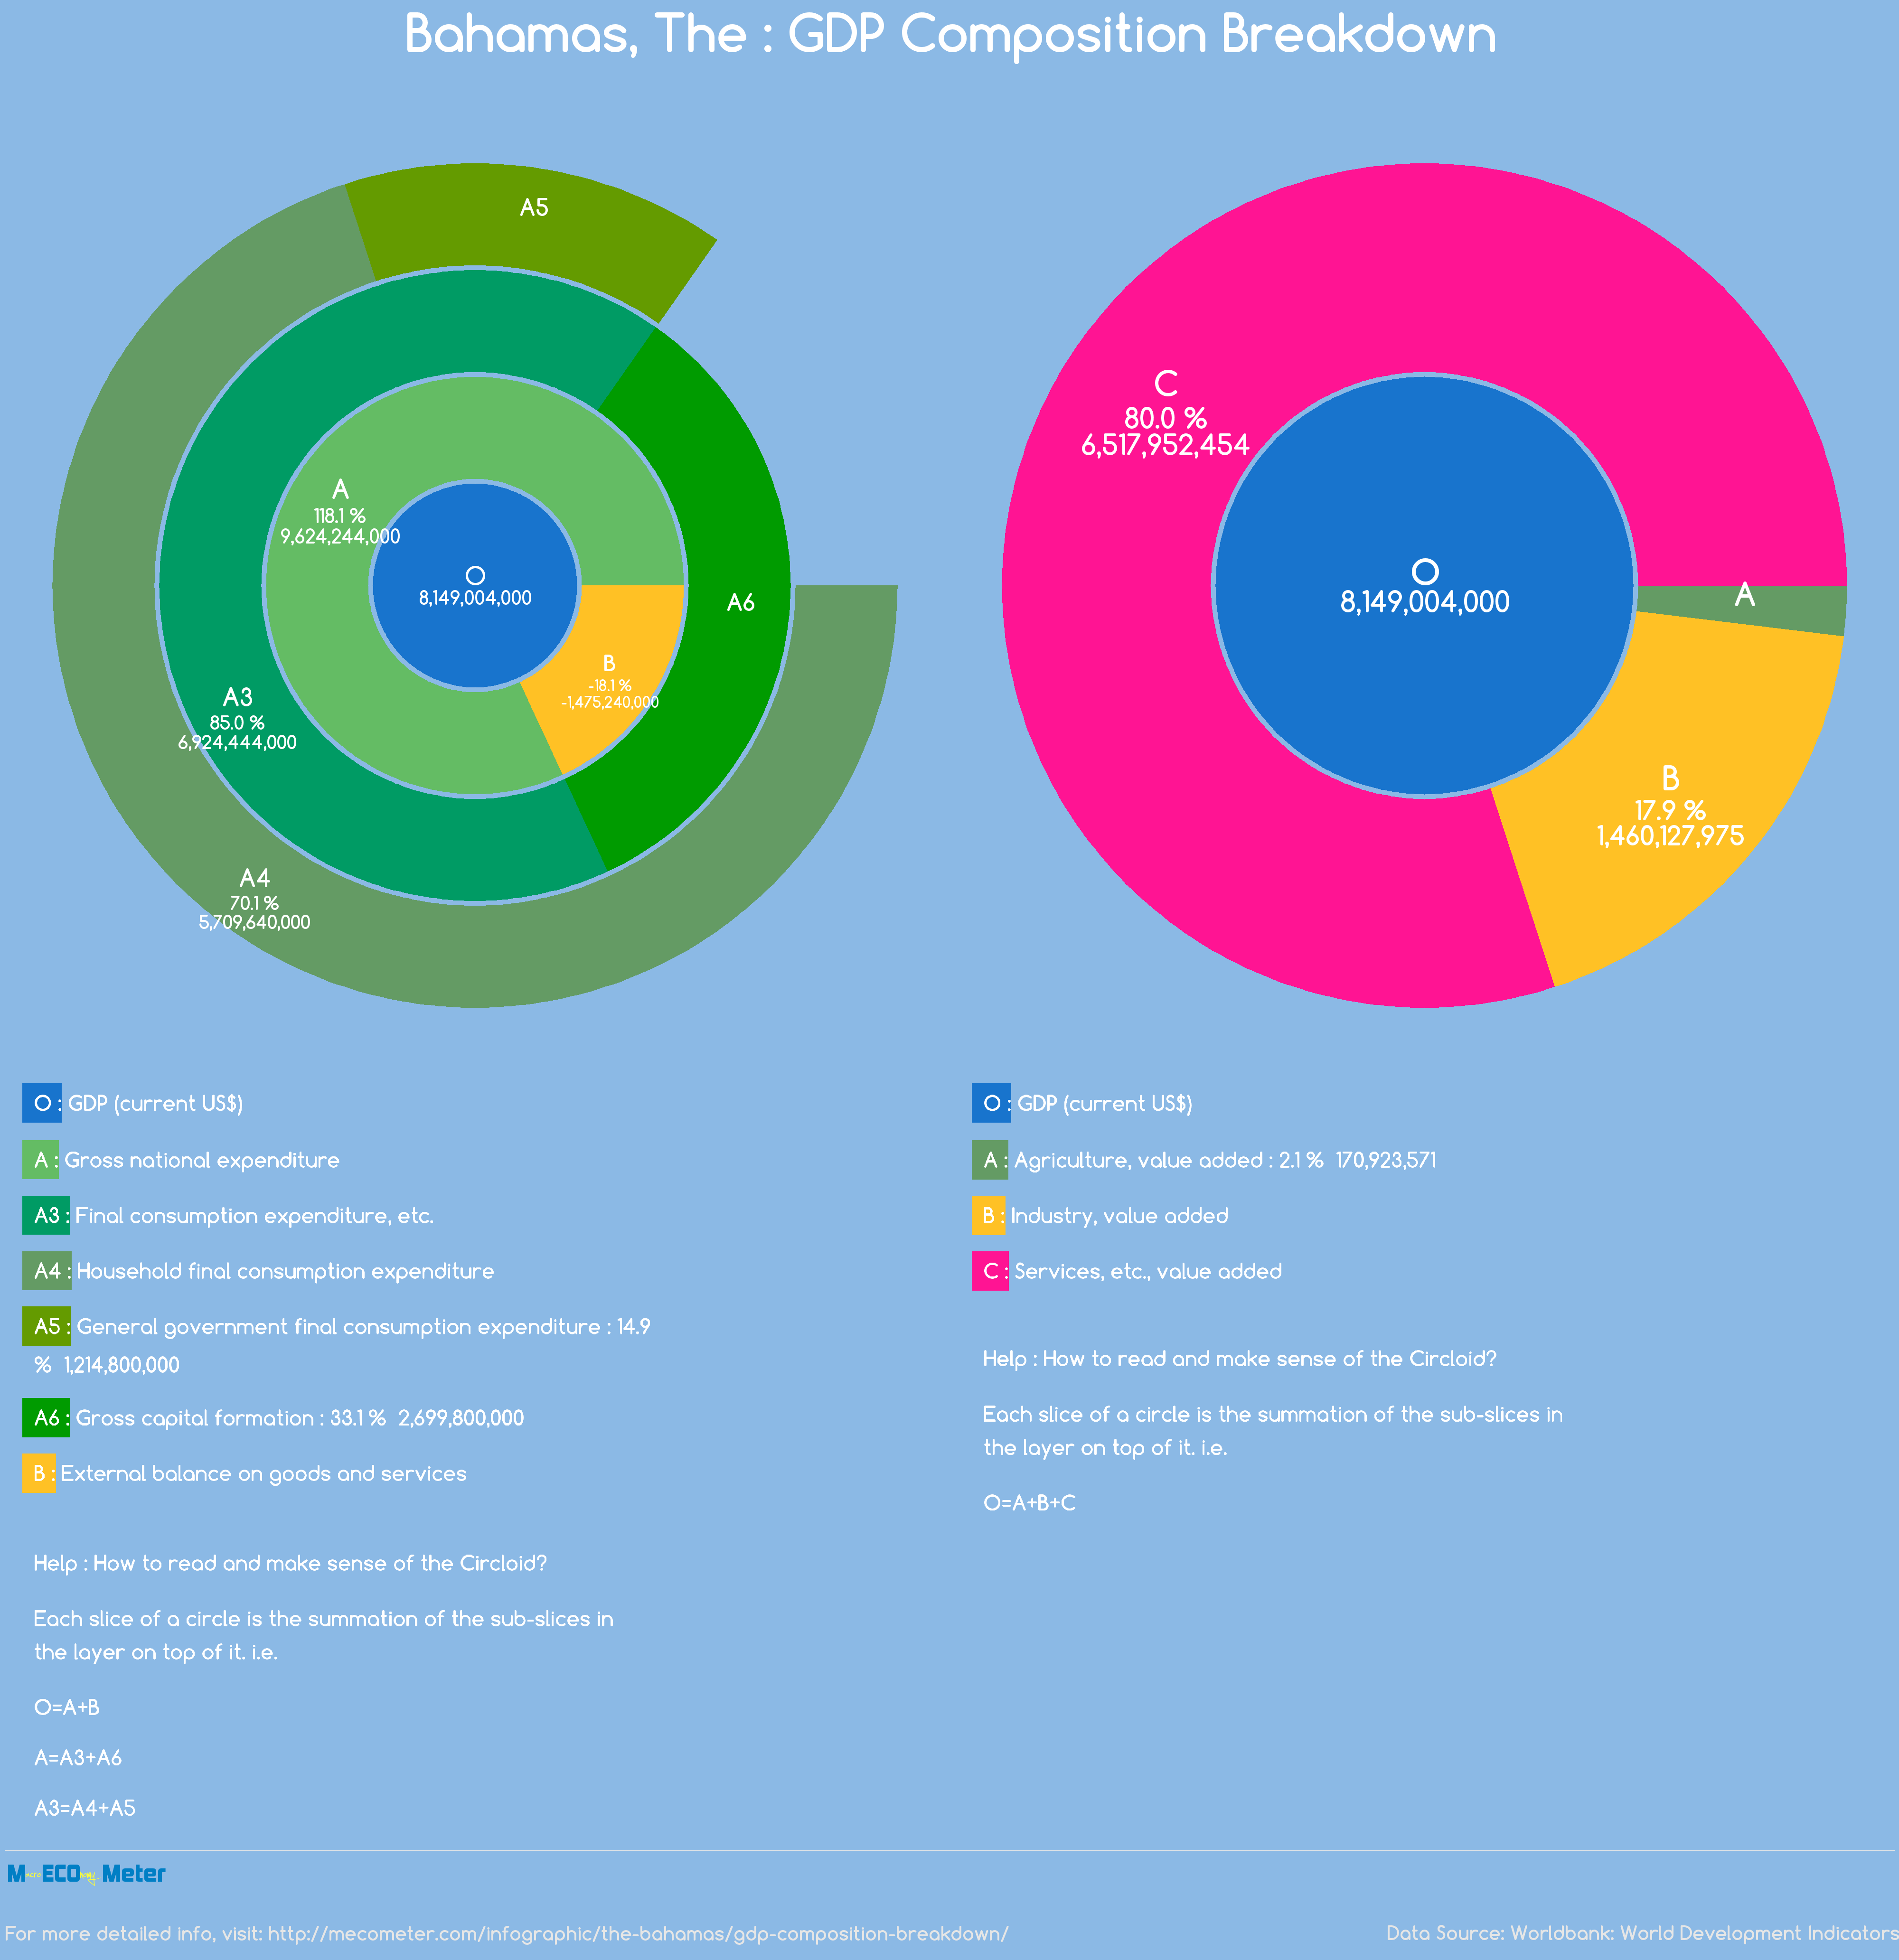 Bahamas, The : GDP Composition Breakdown